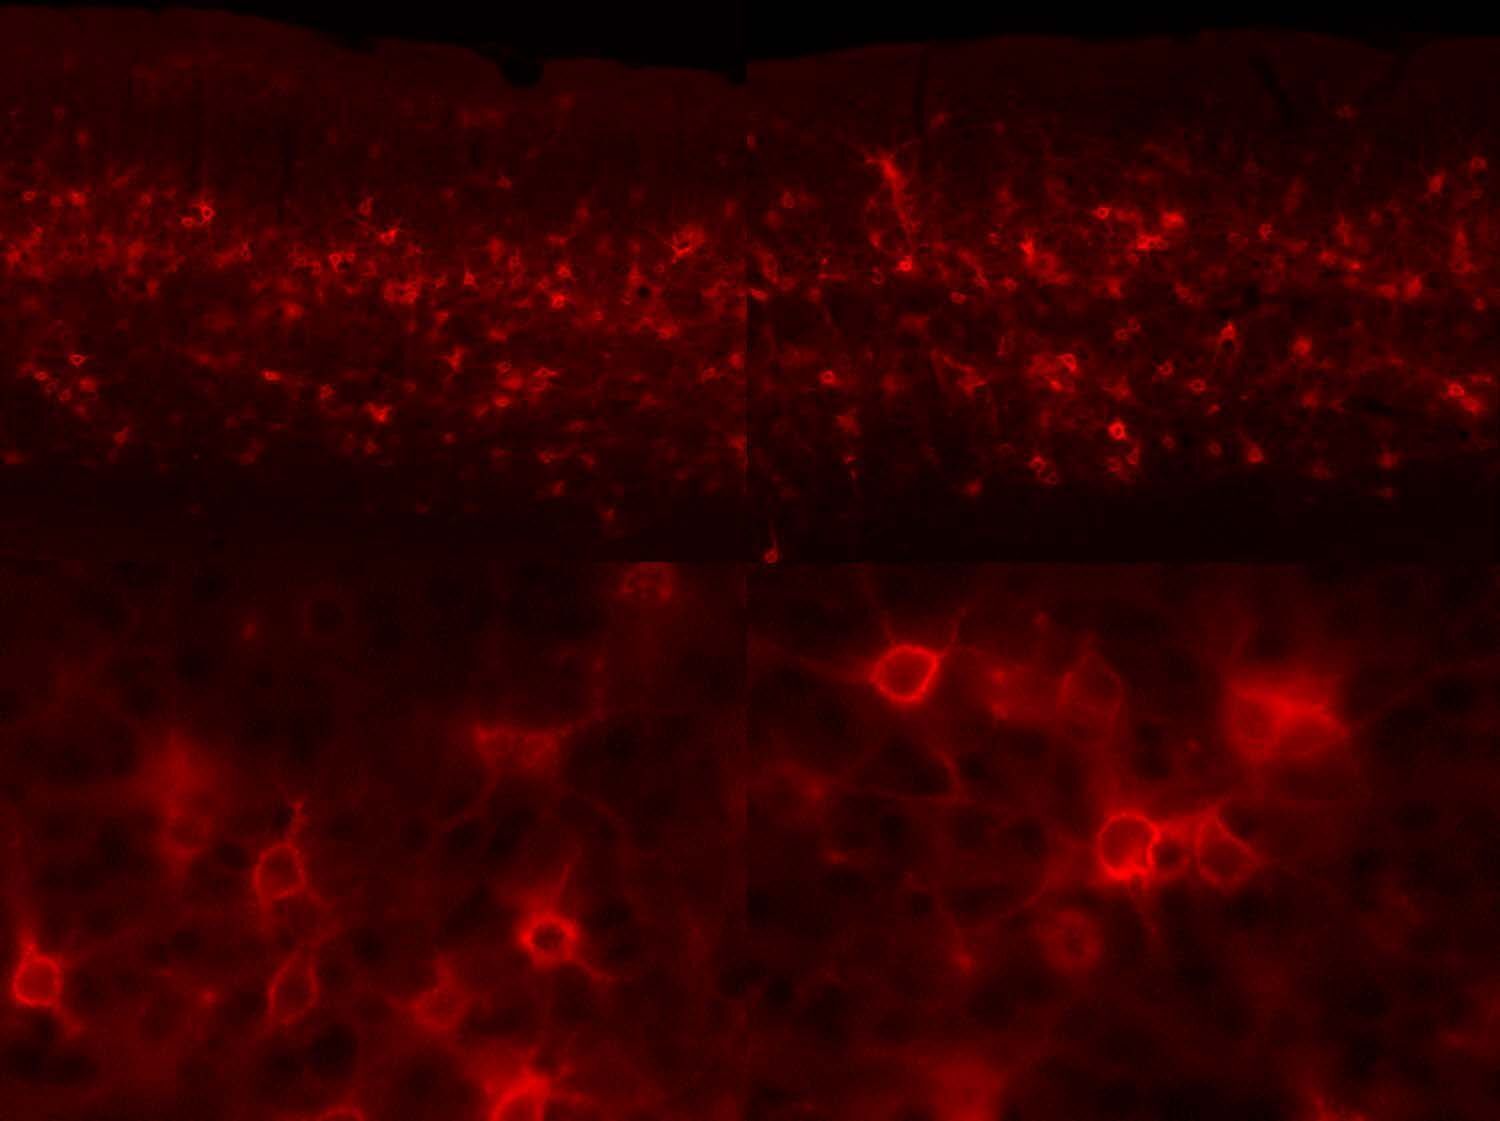 Neuronal plasticity is facilitated by the enzymatic digestion of the brain’s extracellular matrix (ECM) (Akol et al., 2021). This fluorescence microscopy image shows neurons in the mouse visual cortex enwrapped by red labelled ECM molecules. Upper row: low magnification, lower row: high magnification.